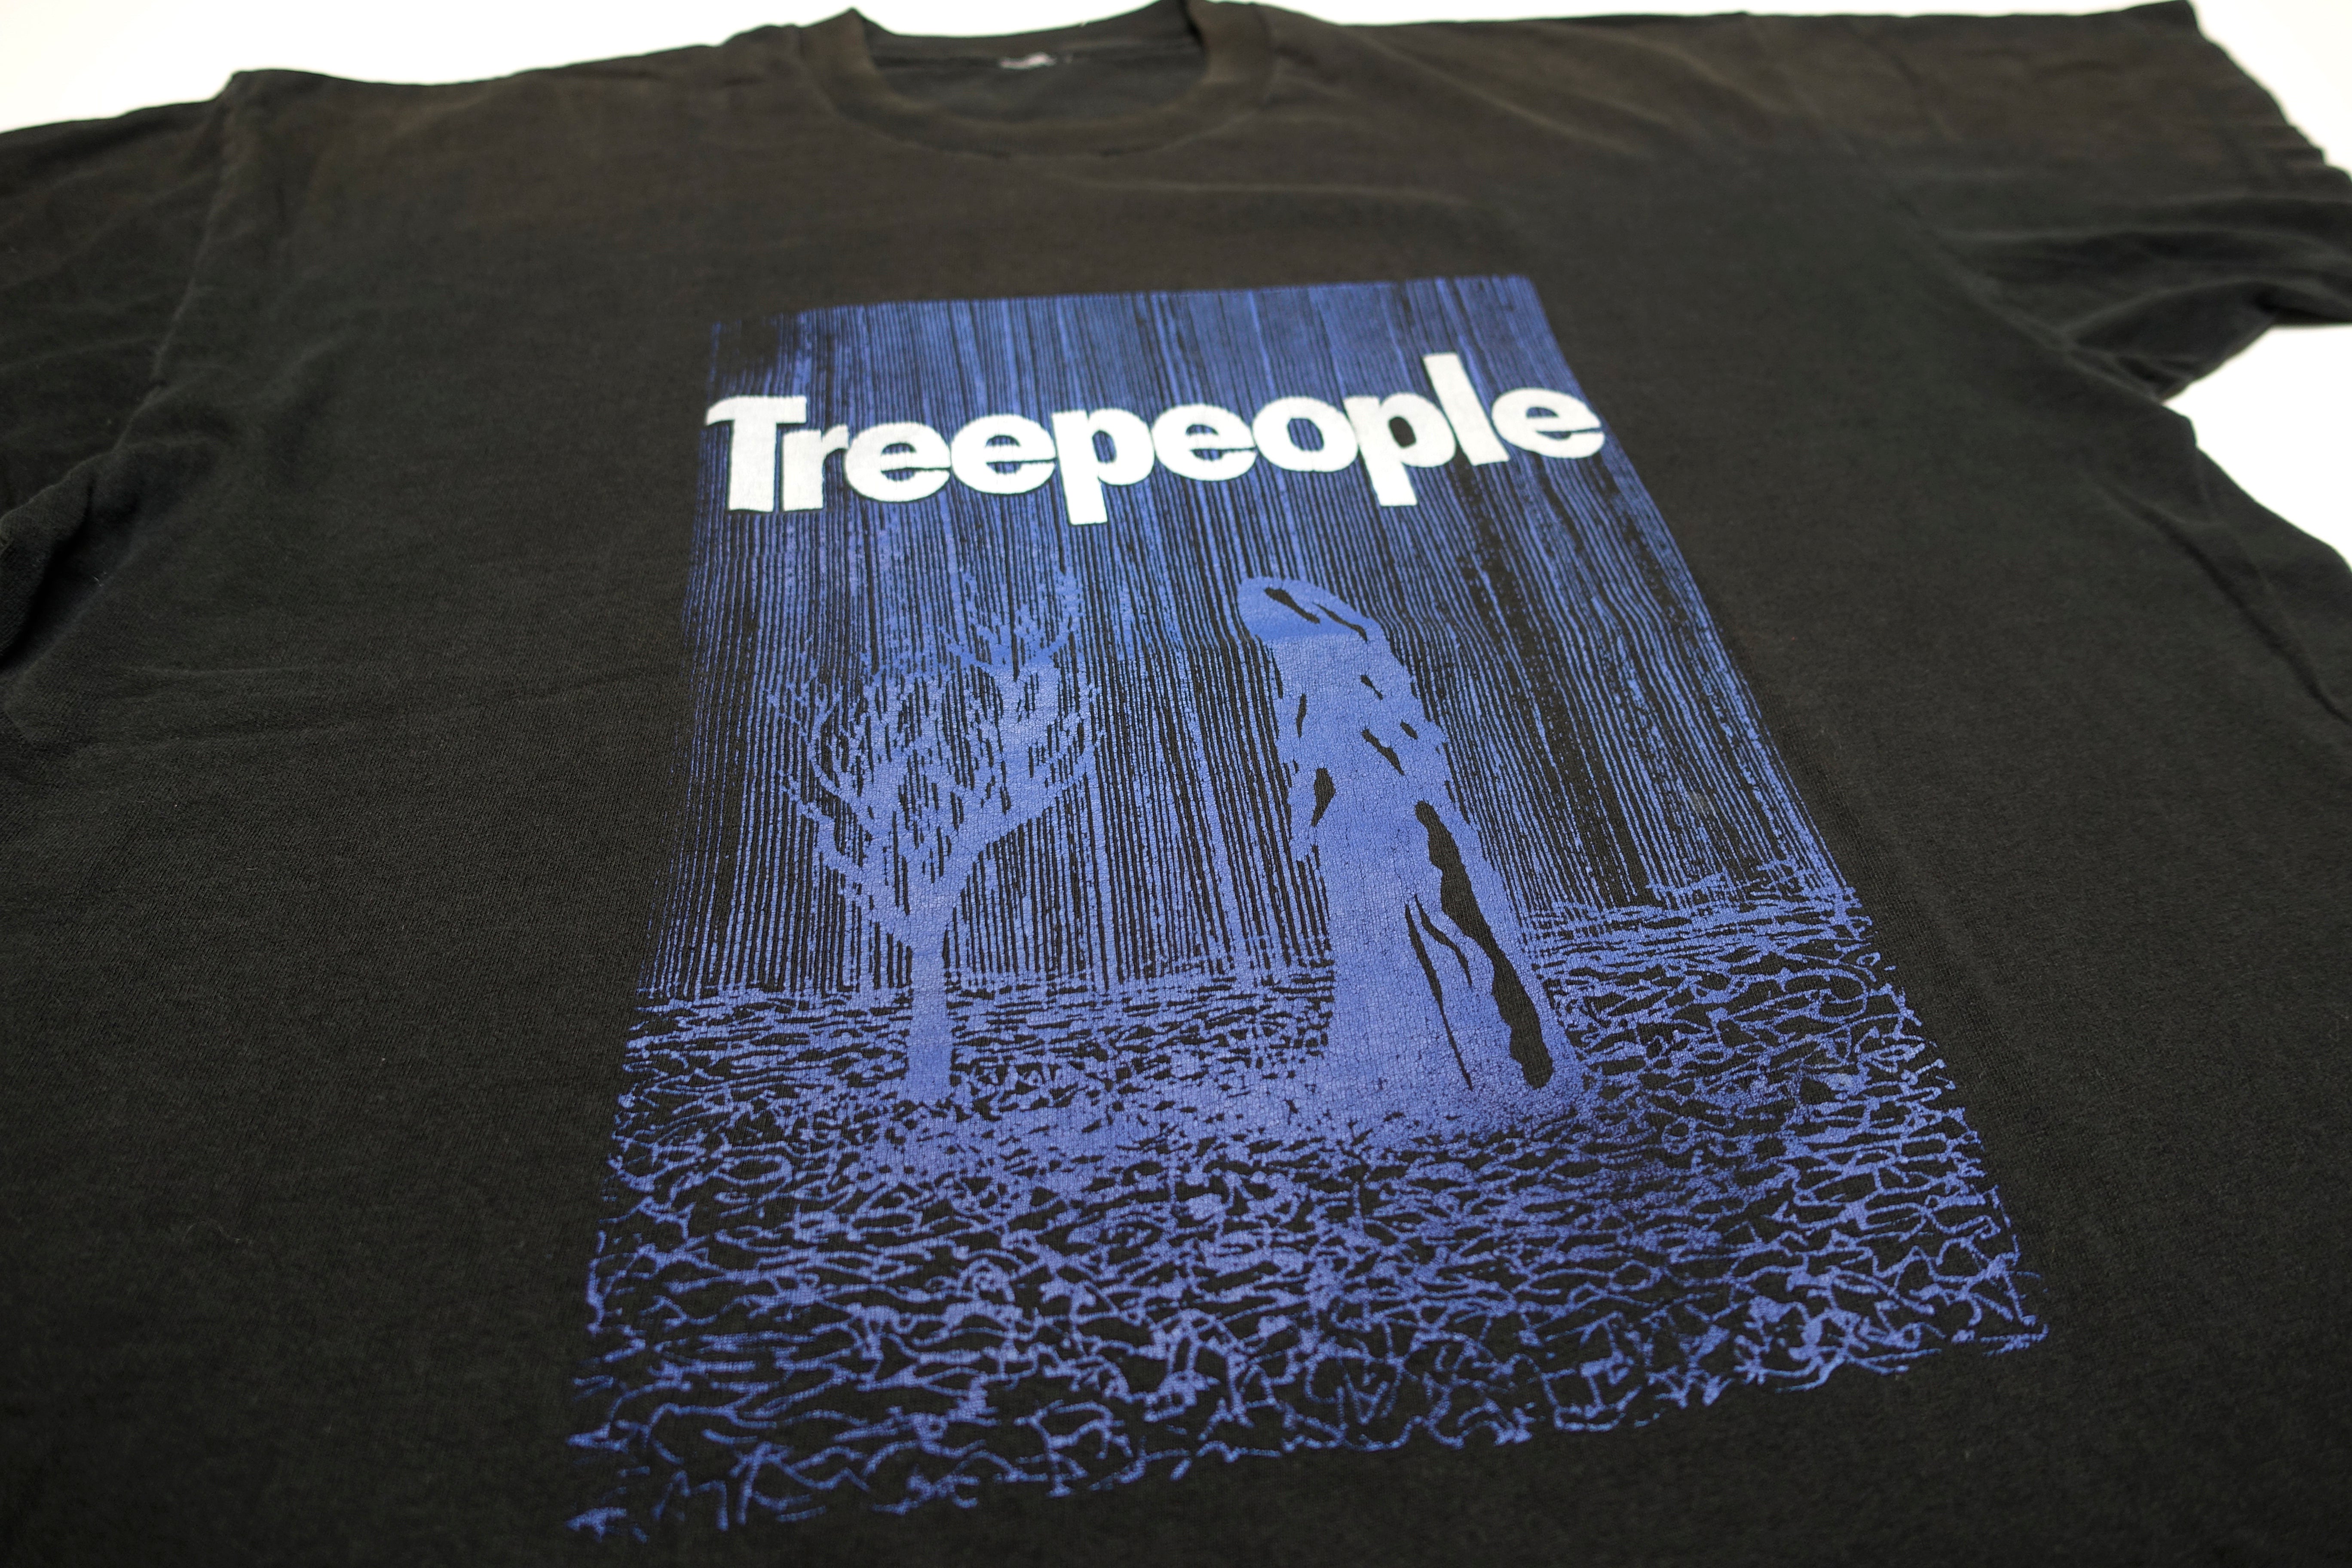 Treepeople - Person & Tree 1 Color 90's Tour Shirt Size XL